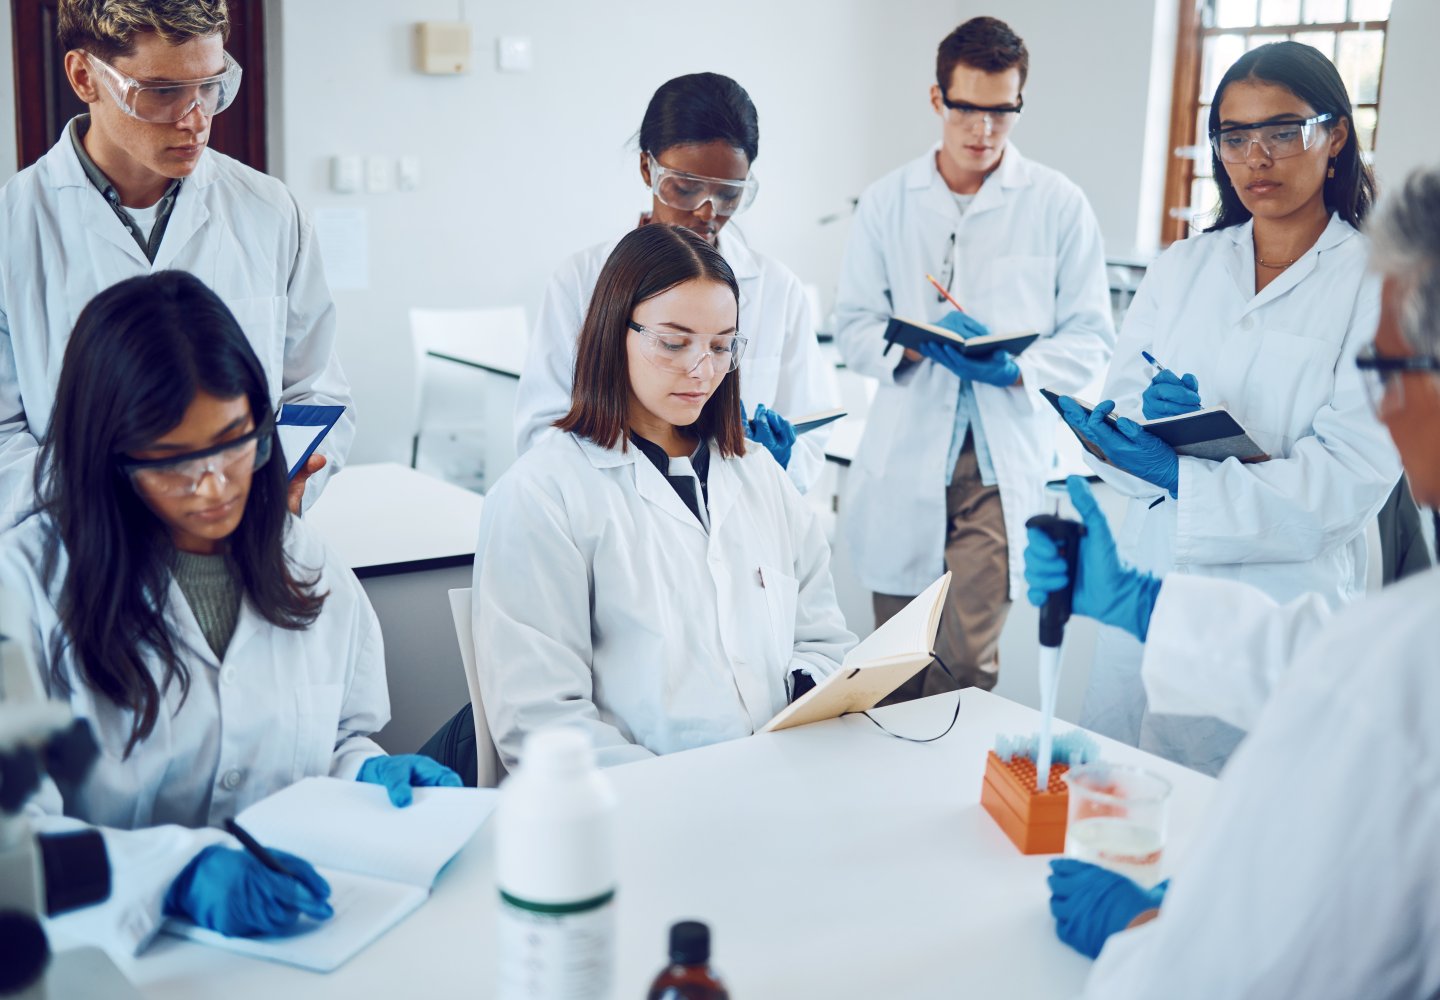 Science students writing notes in a laboratory